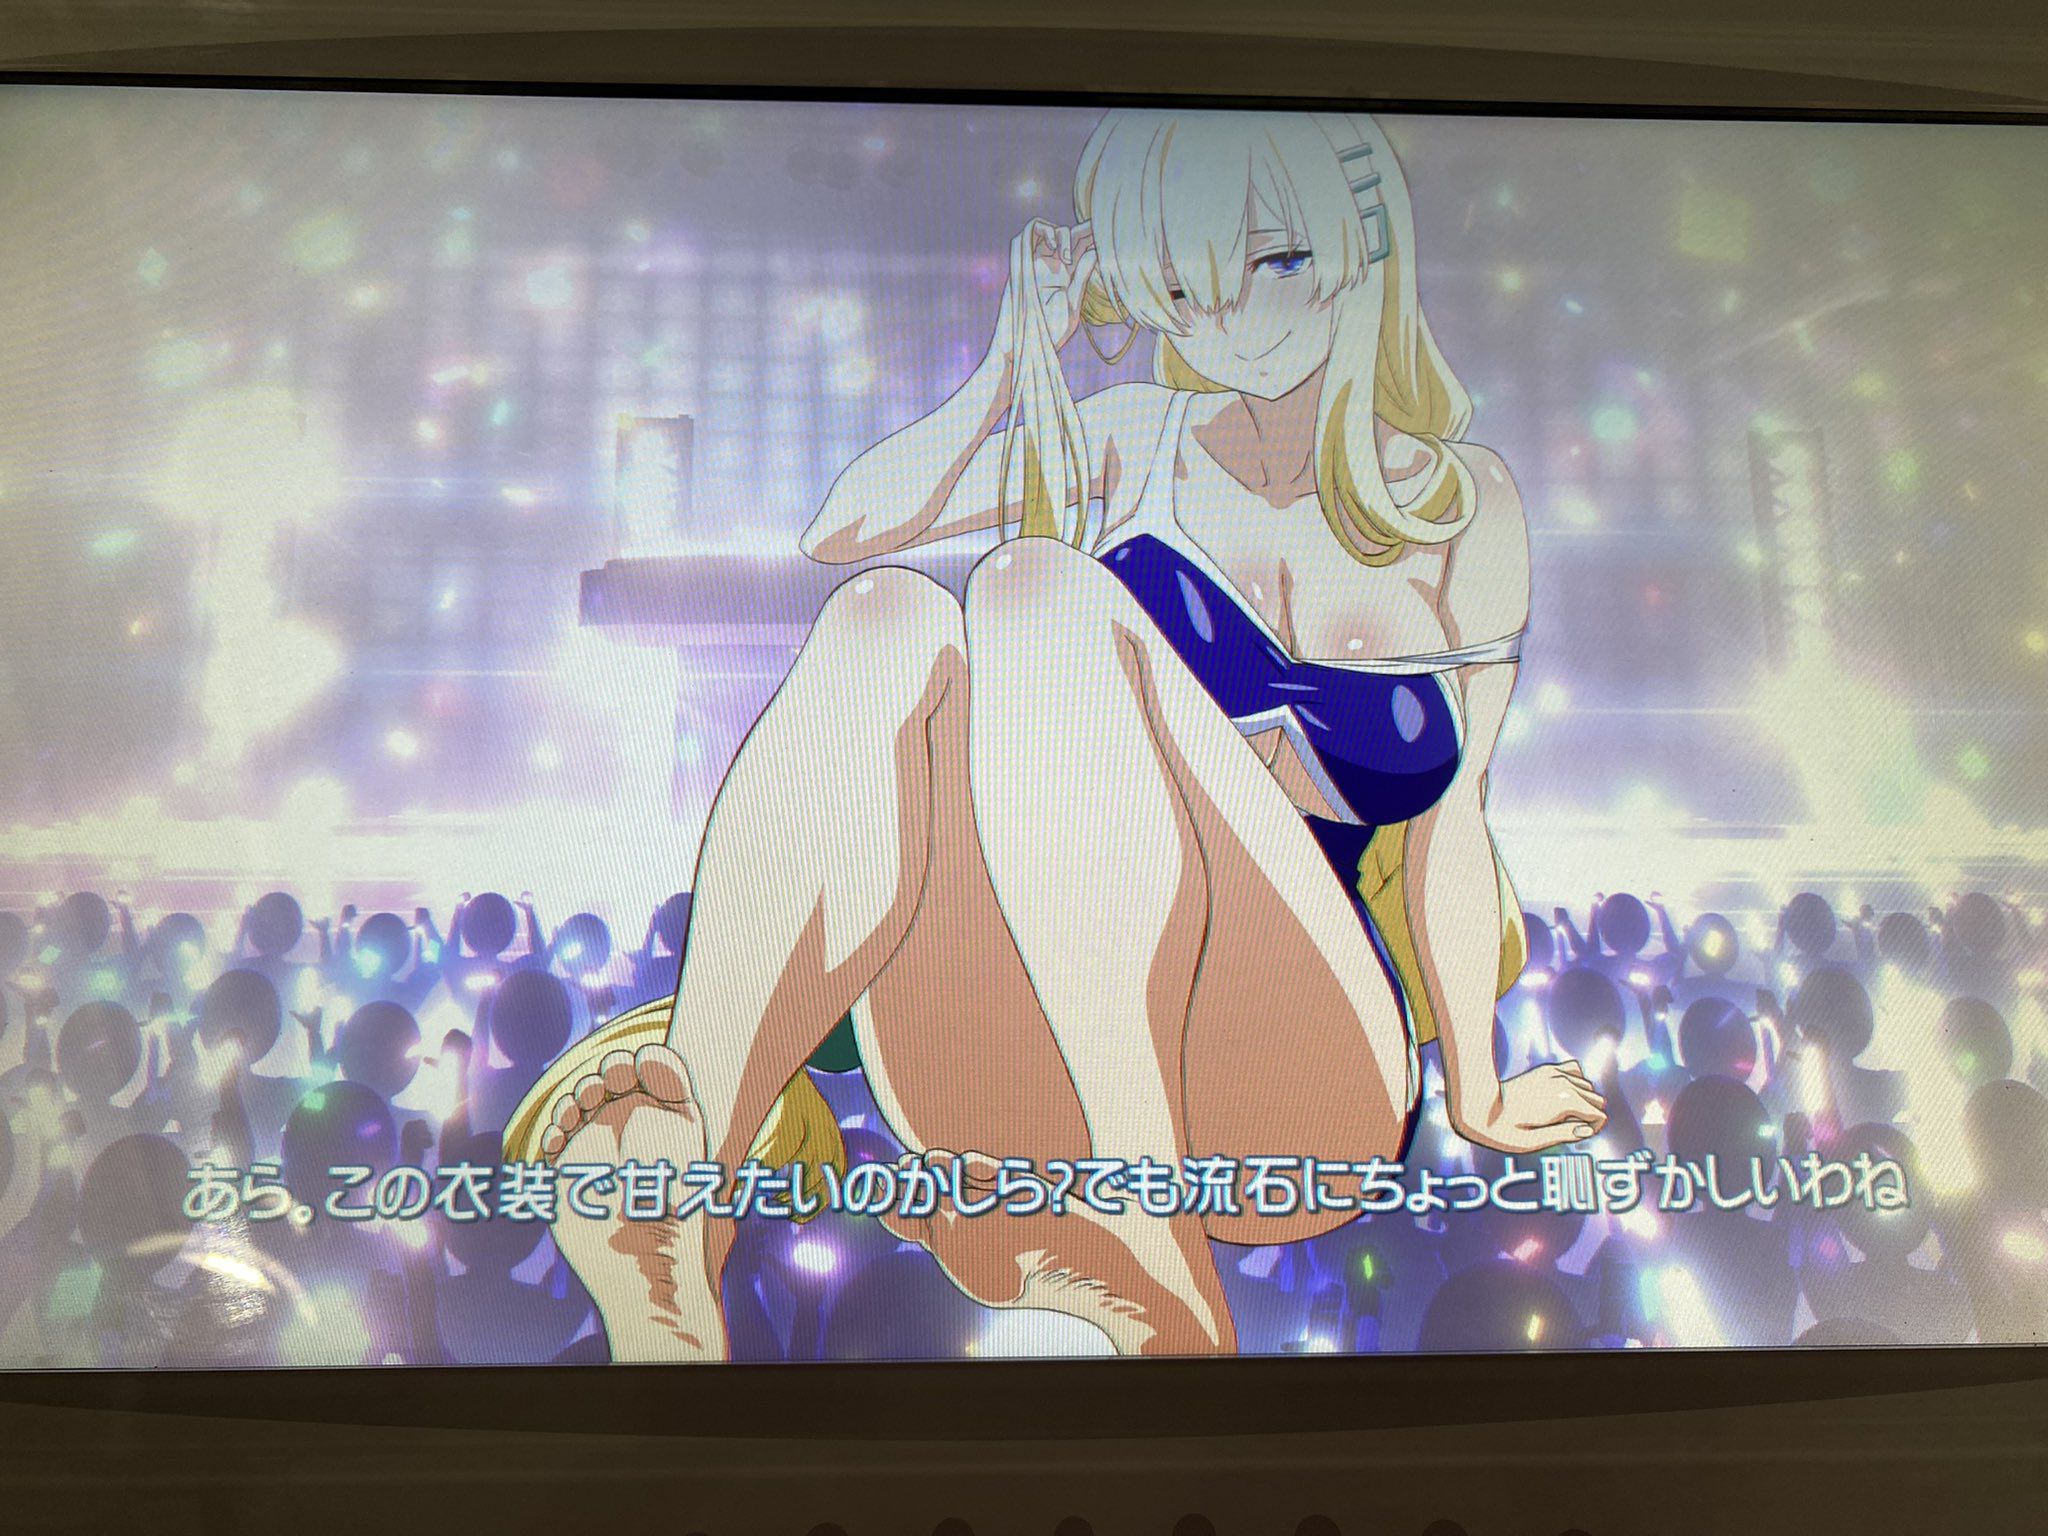 【Good news】Konami's new mahjong game, wwwwwwwww which was also a naughty game 5